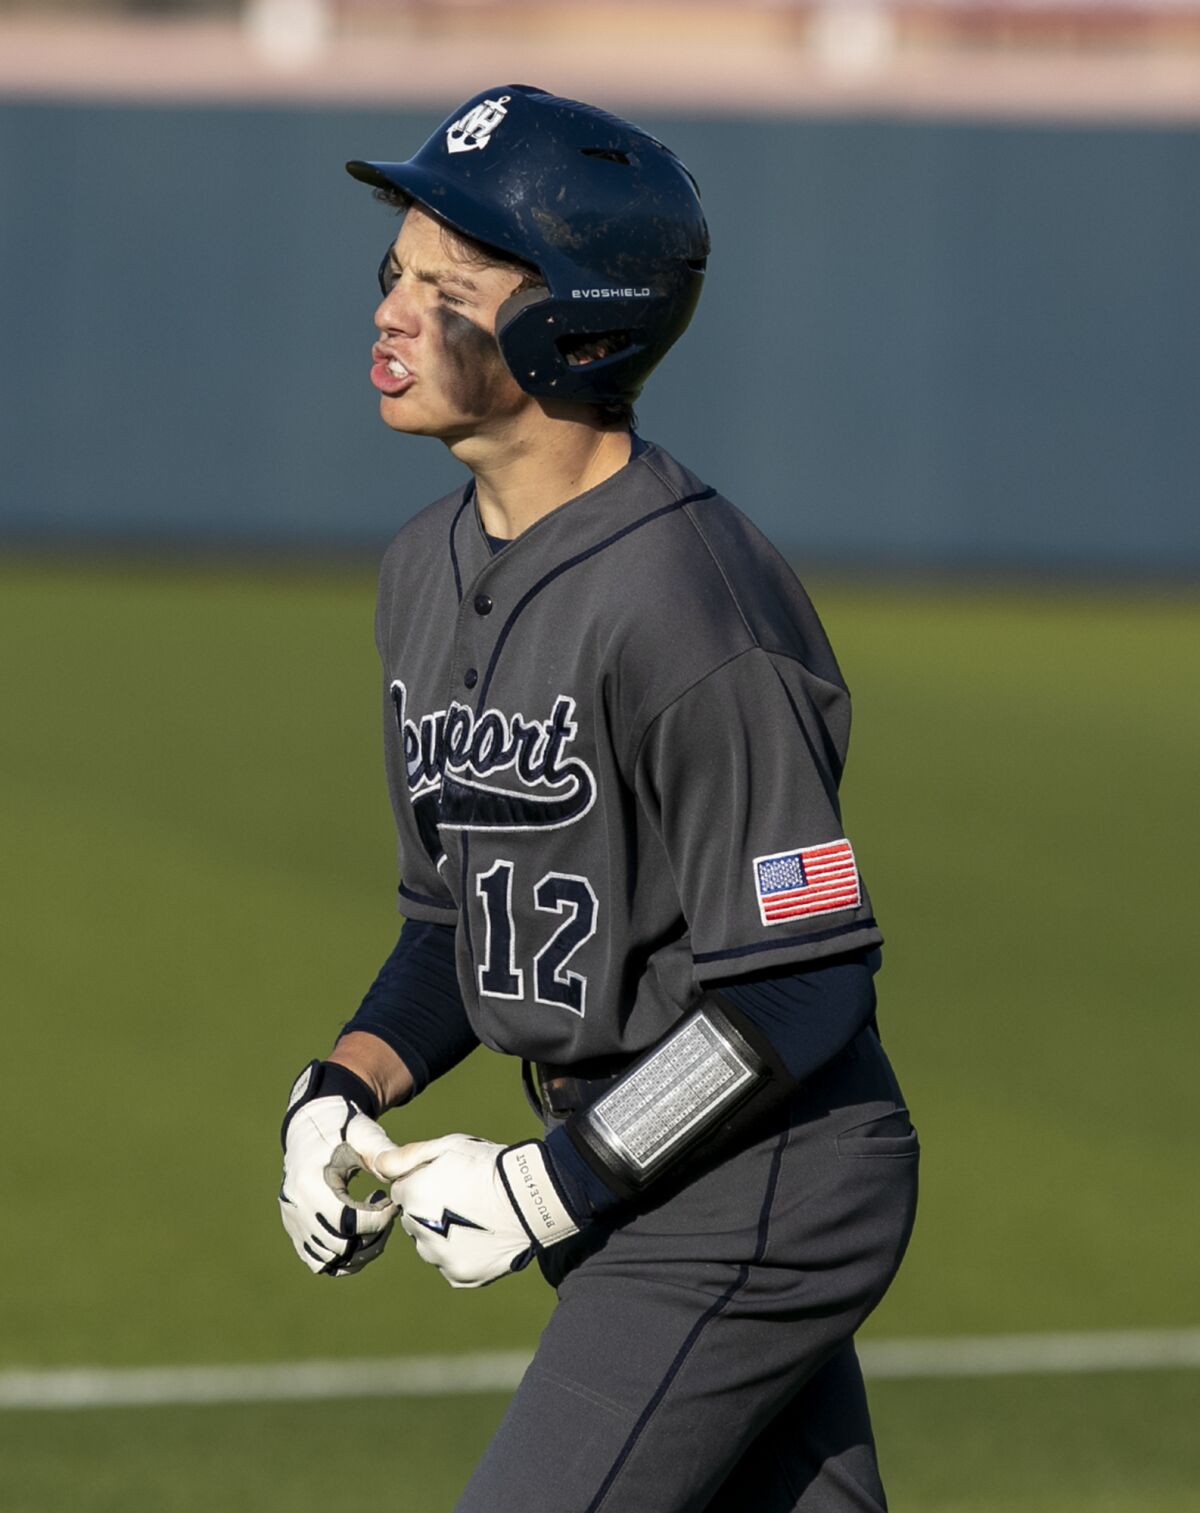 Newport Harbor's Nick Montgomery celebrates after beating out an infield single for a run batted in on Friday.